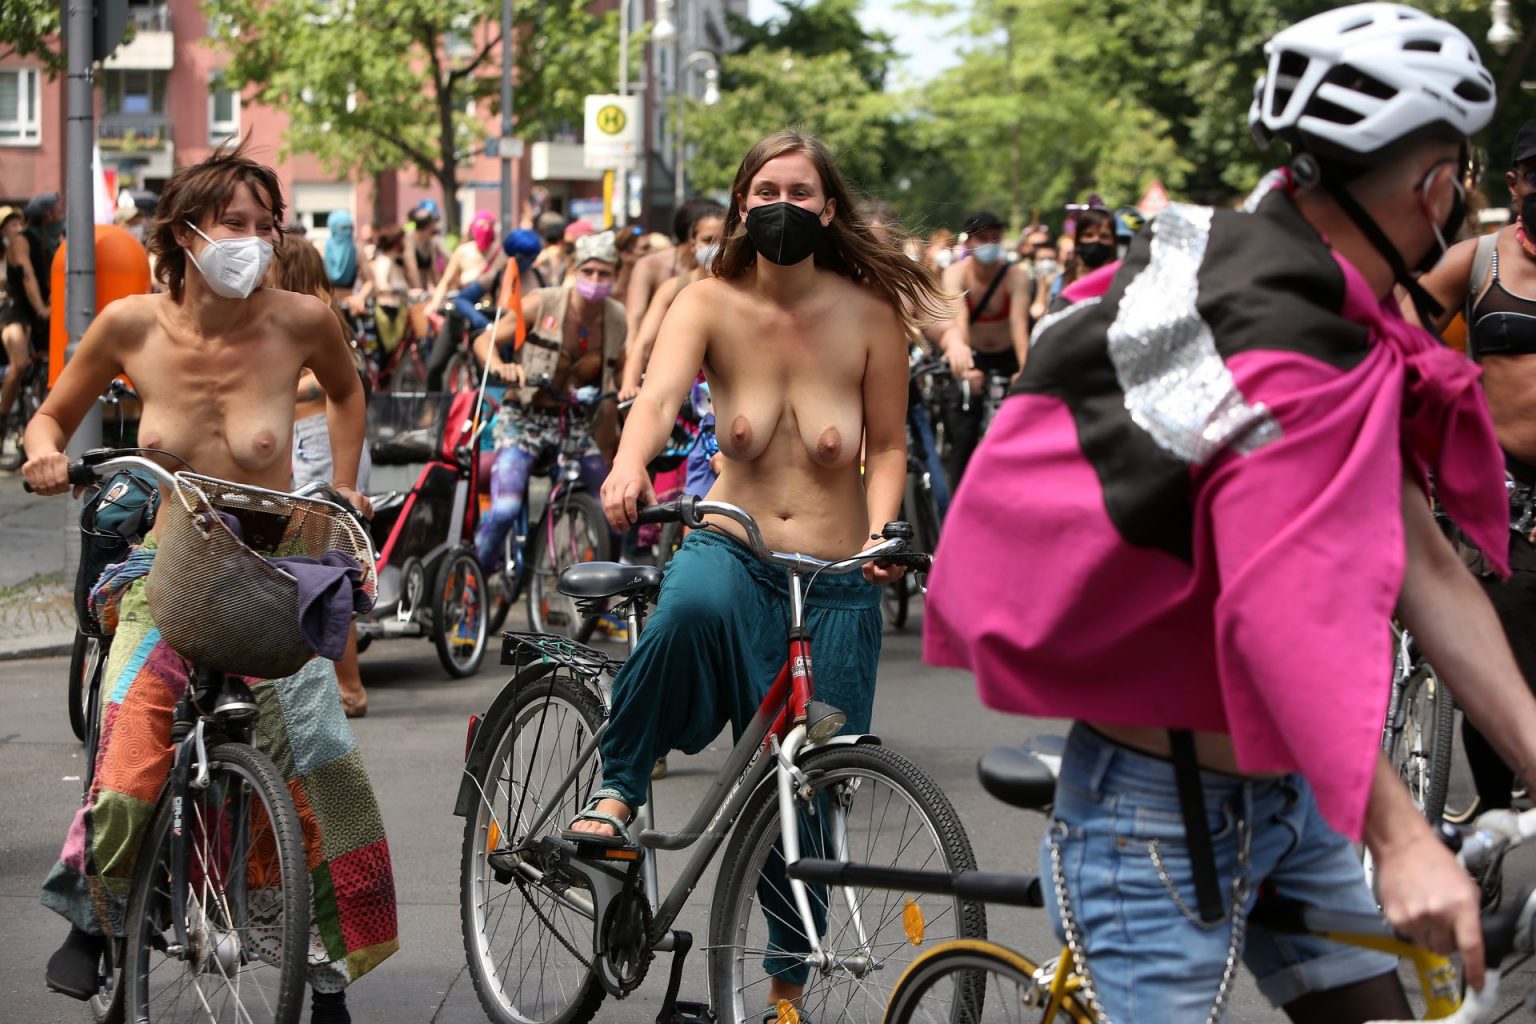 Women Hold Topless Protest For Equal Rights 64 Photos Updated 